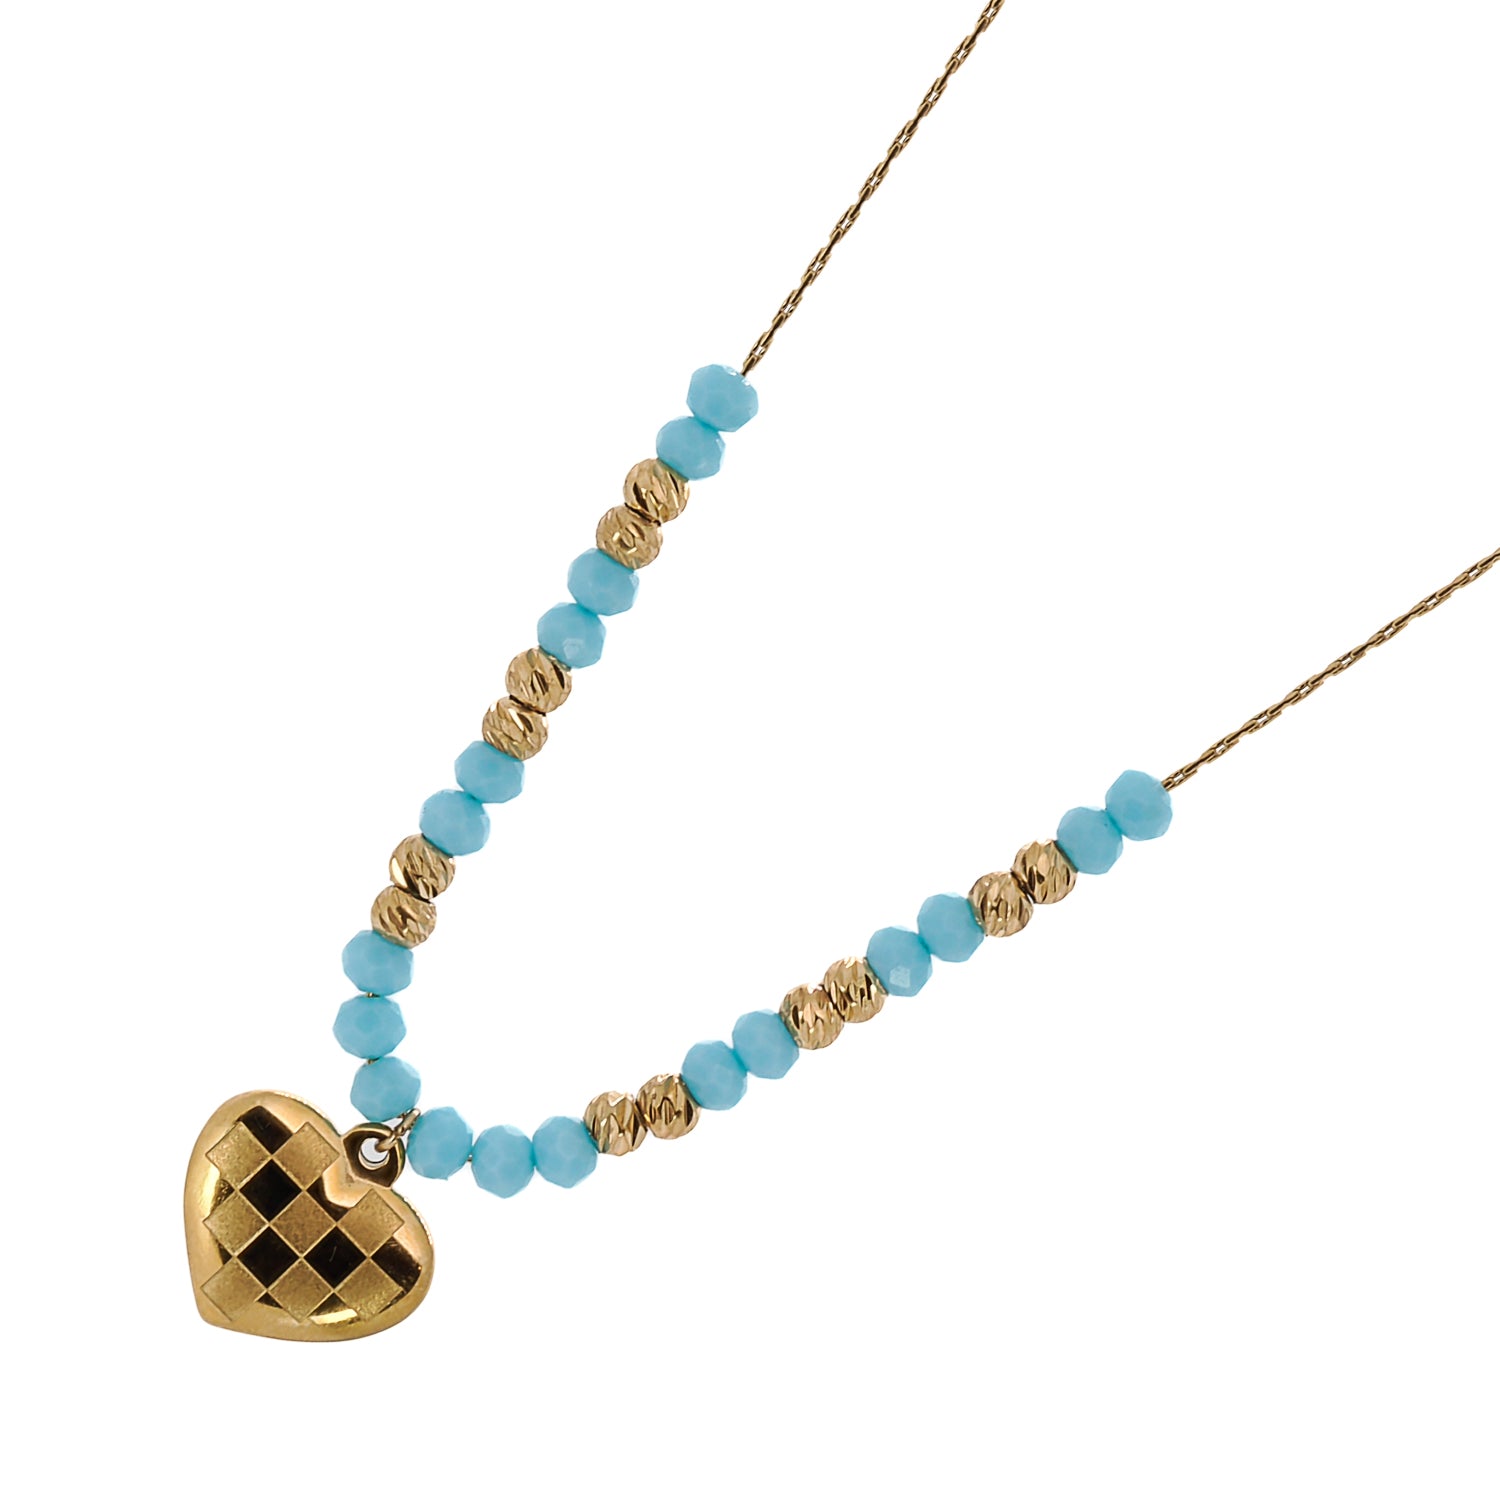 Gold-Plated Elegance - Blue Crystal Beads Necklace.